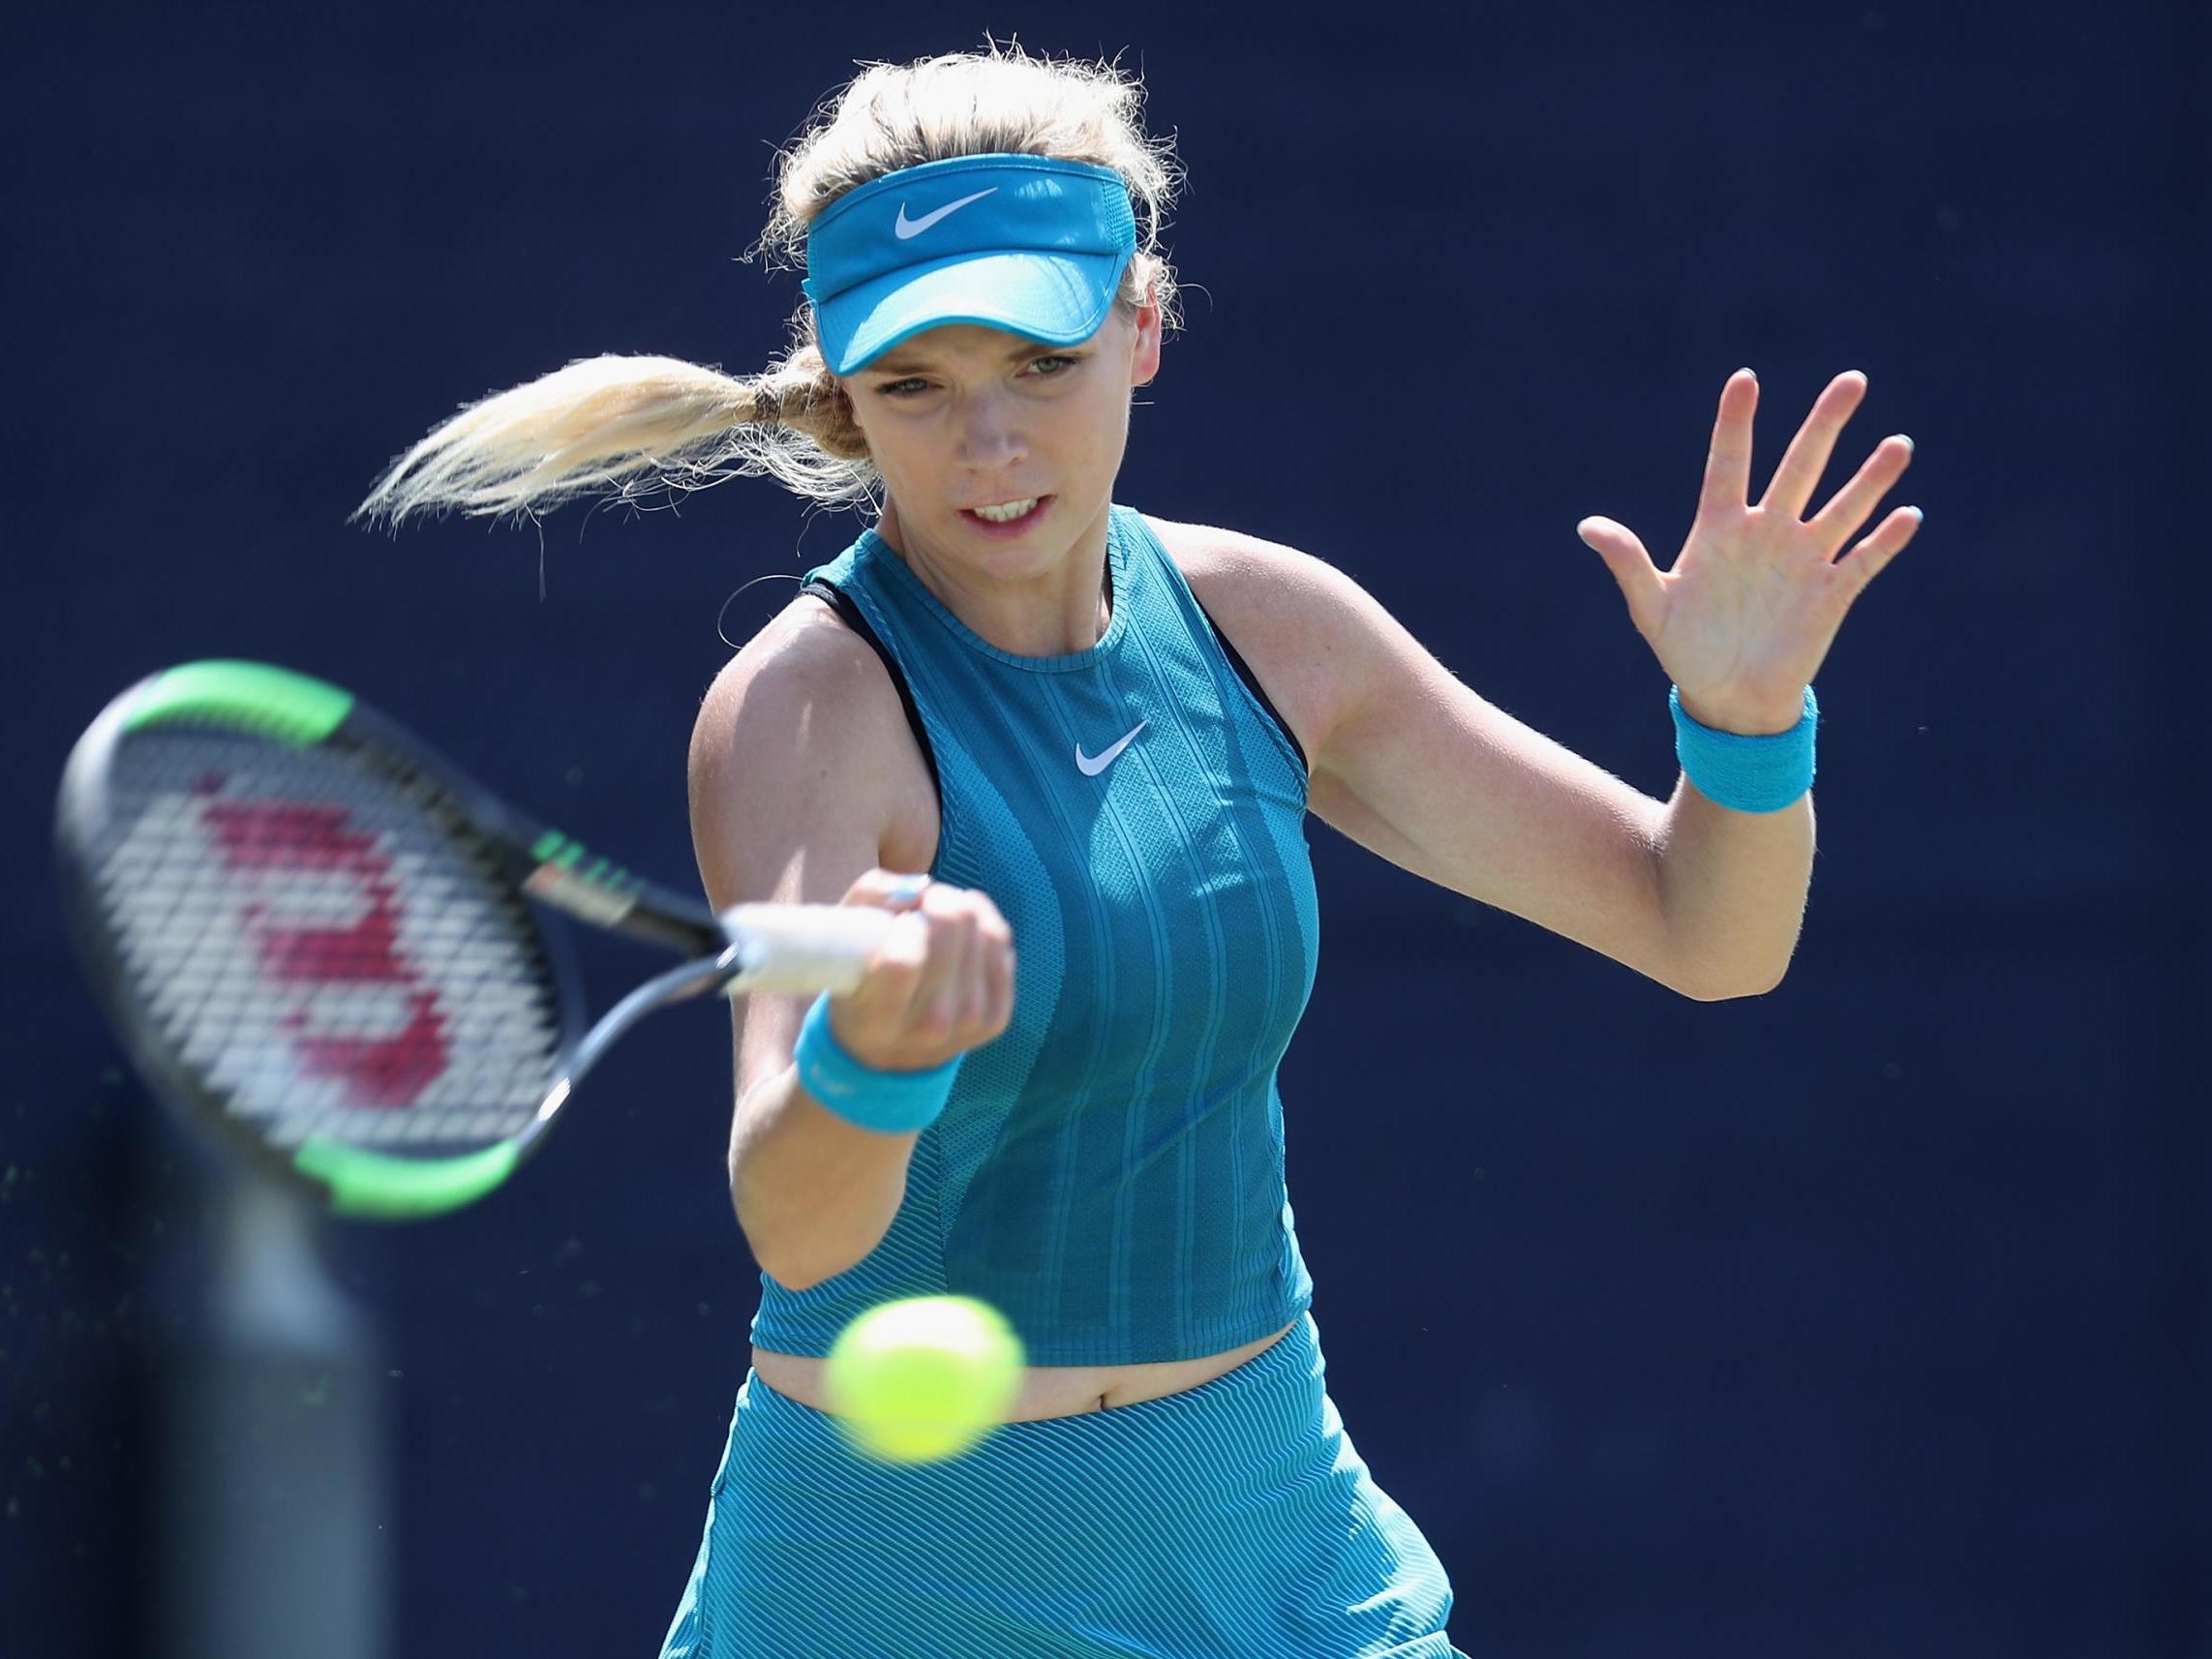 Boulter had dismissed fifth seed Aleksandra Krunic in the first round